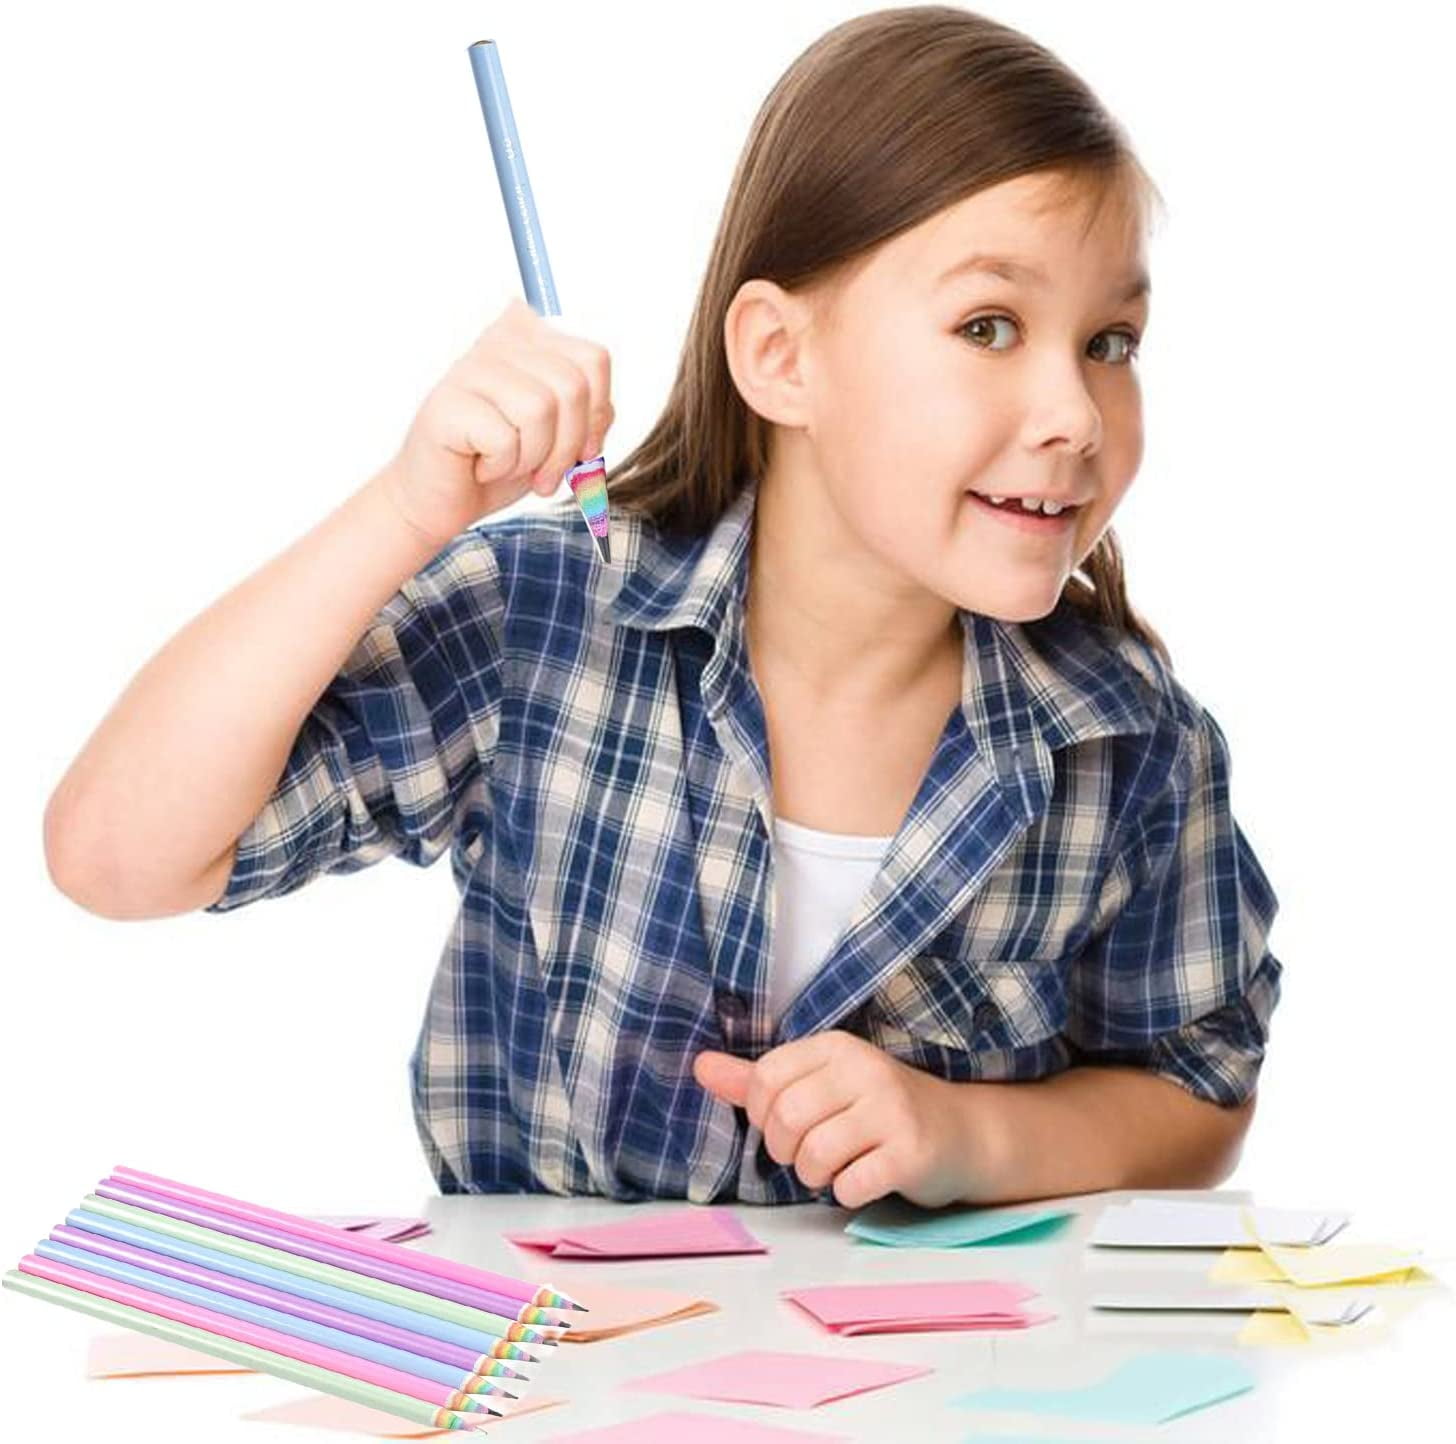 Baker Ross AT962 Rainbow Pencil Set - Pack of 12, Ideal for Kids School Set, Homework, School Classwork, Party Bag Filler and Small Gifts